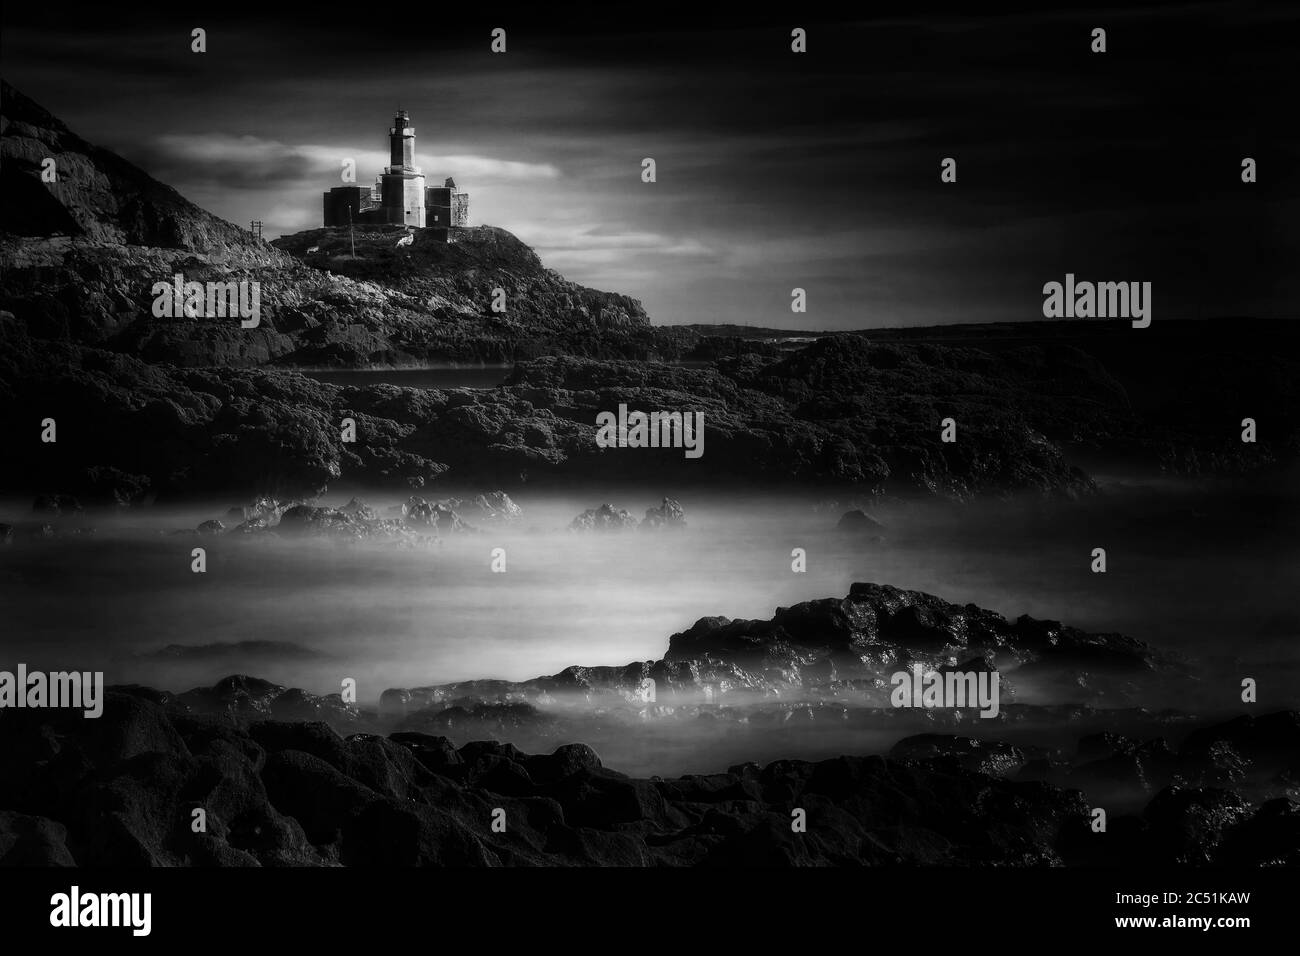 The Mumbles with it's lighthouse as seen from Bracelet Bay on the Gower Peninsular Wales, UK black & white monochrome image Stock Photo